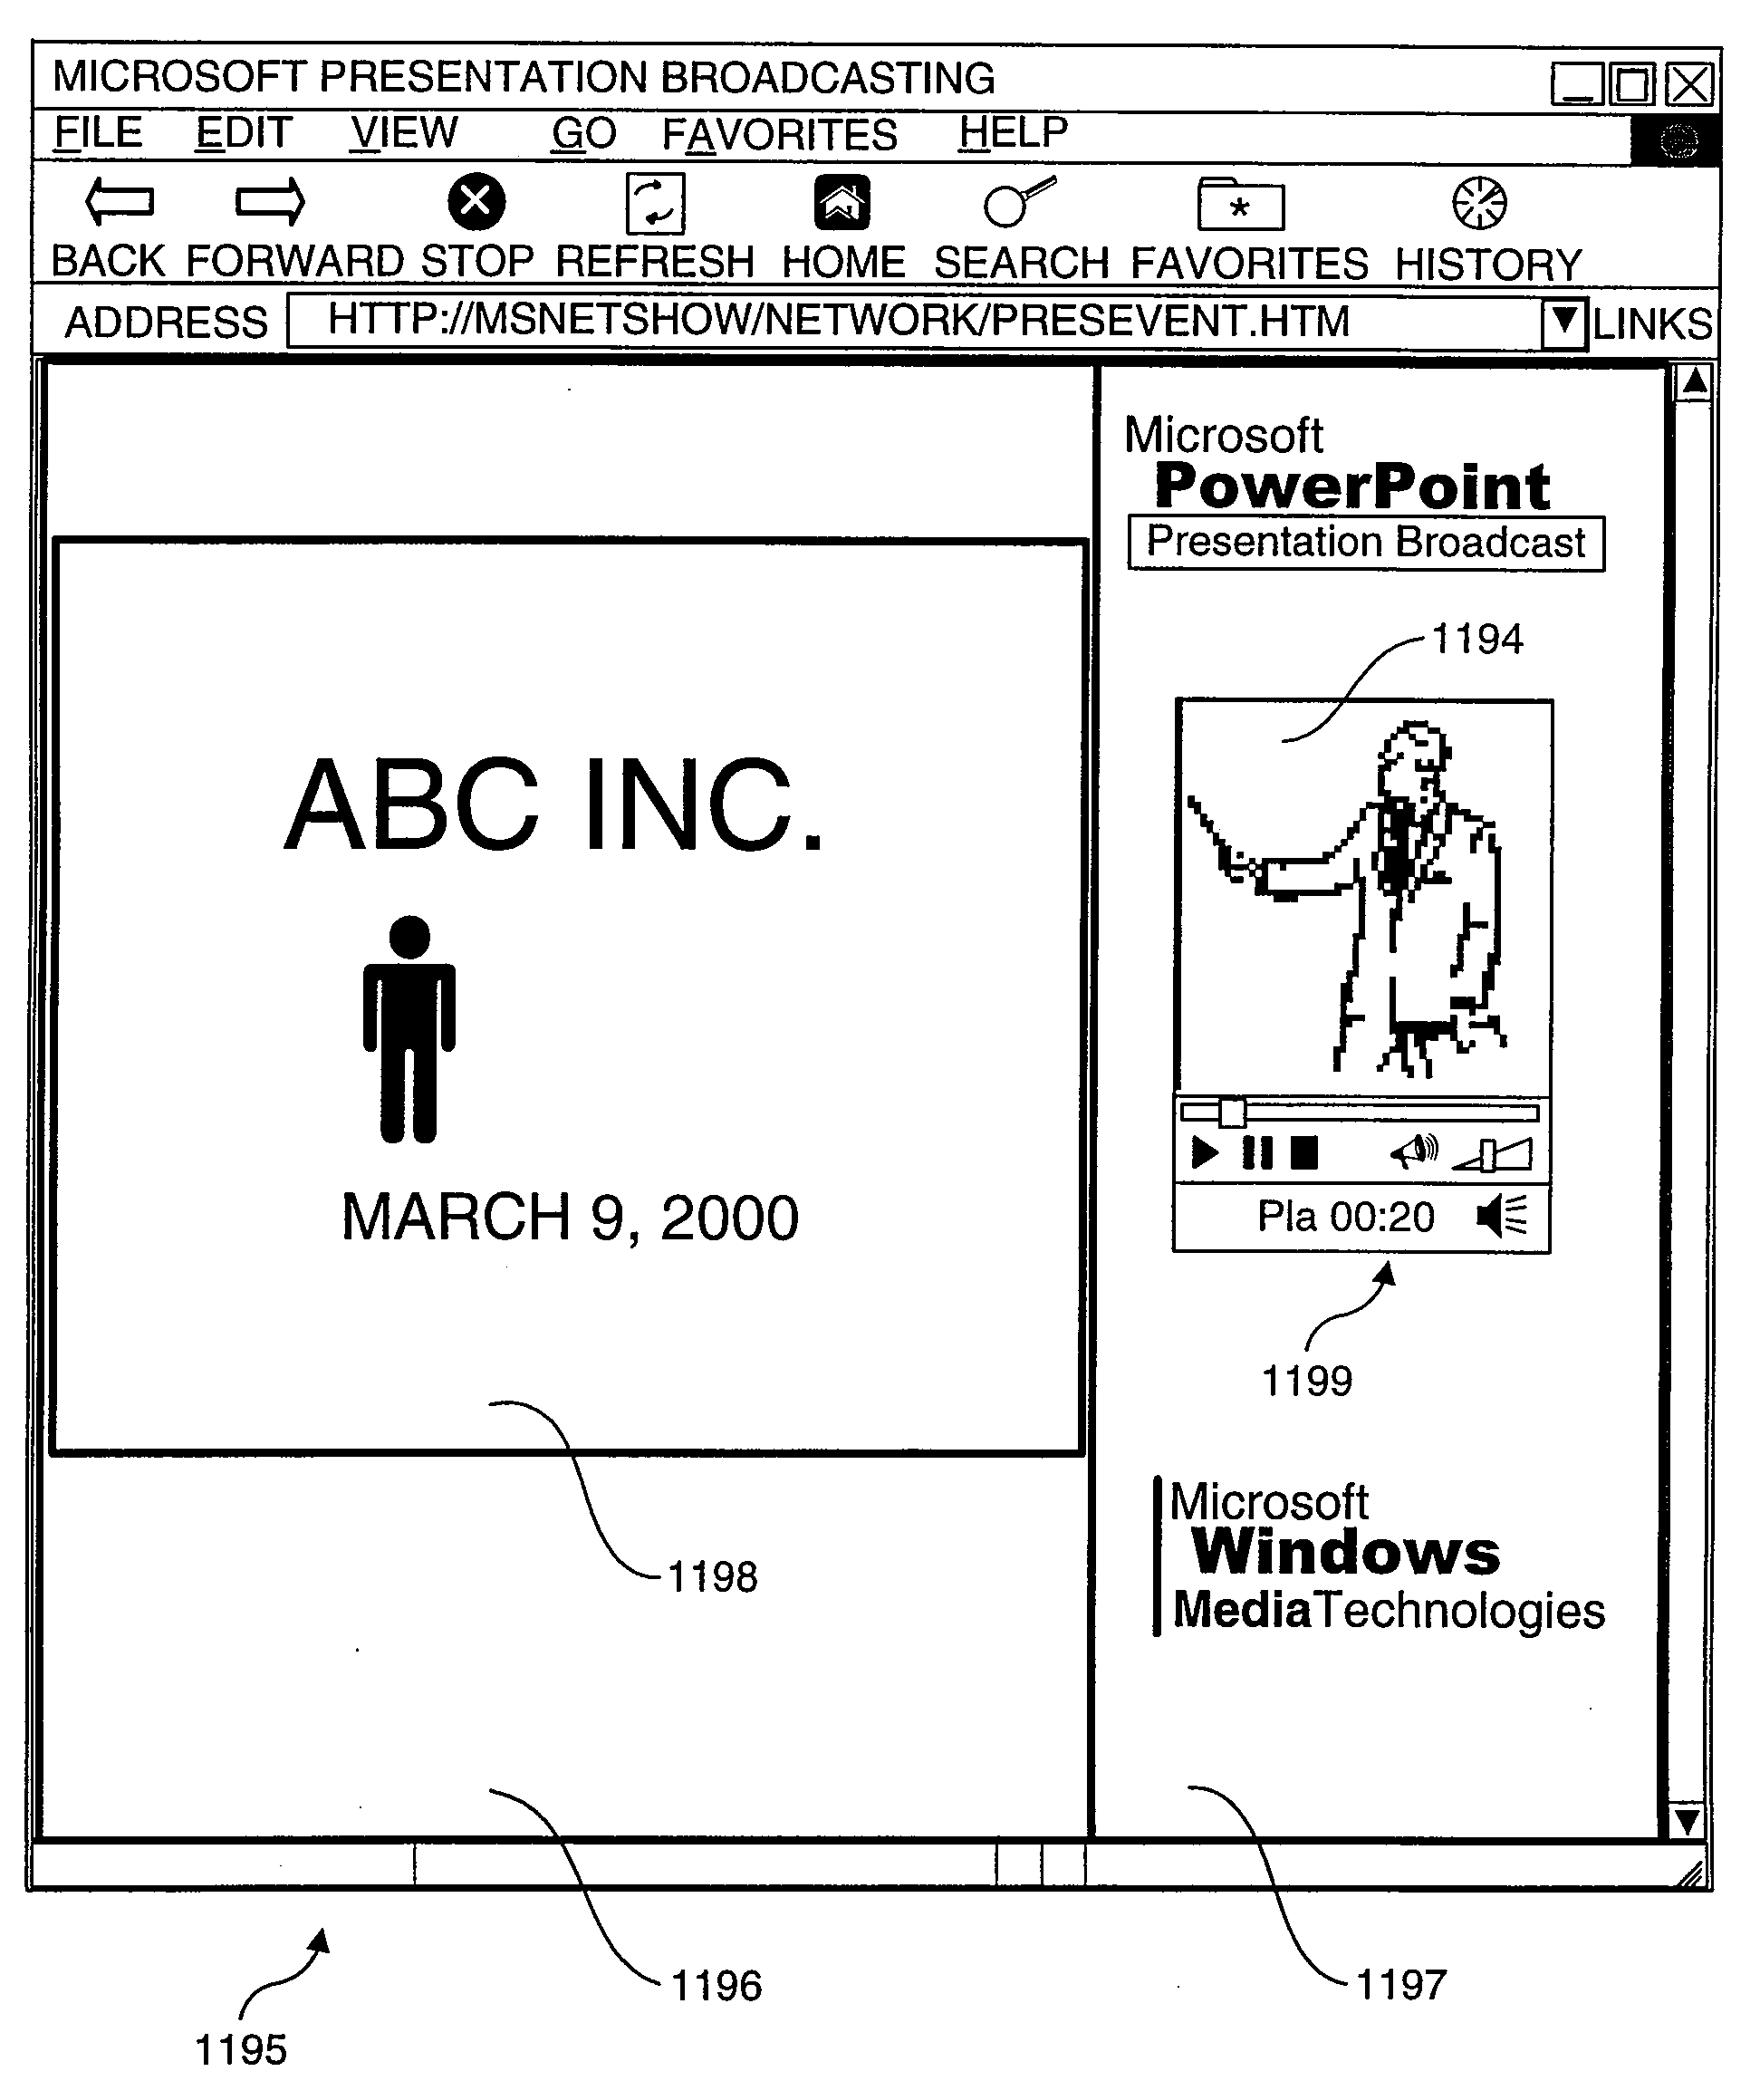 System and method for recording a presentation for on-demand viewing over a computer network